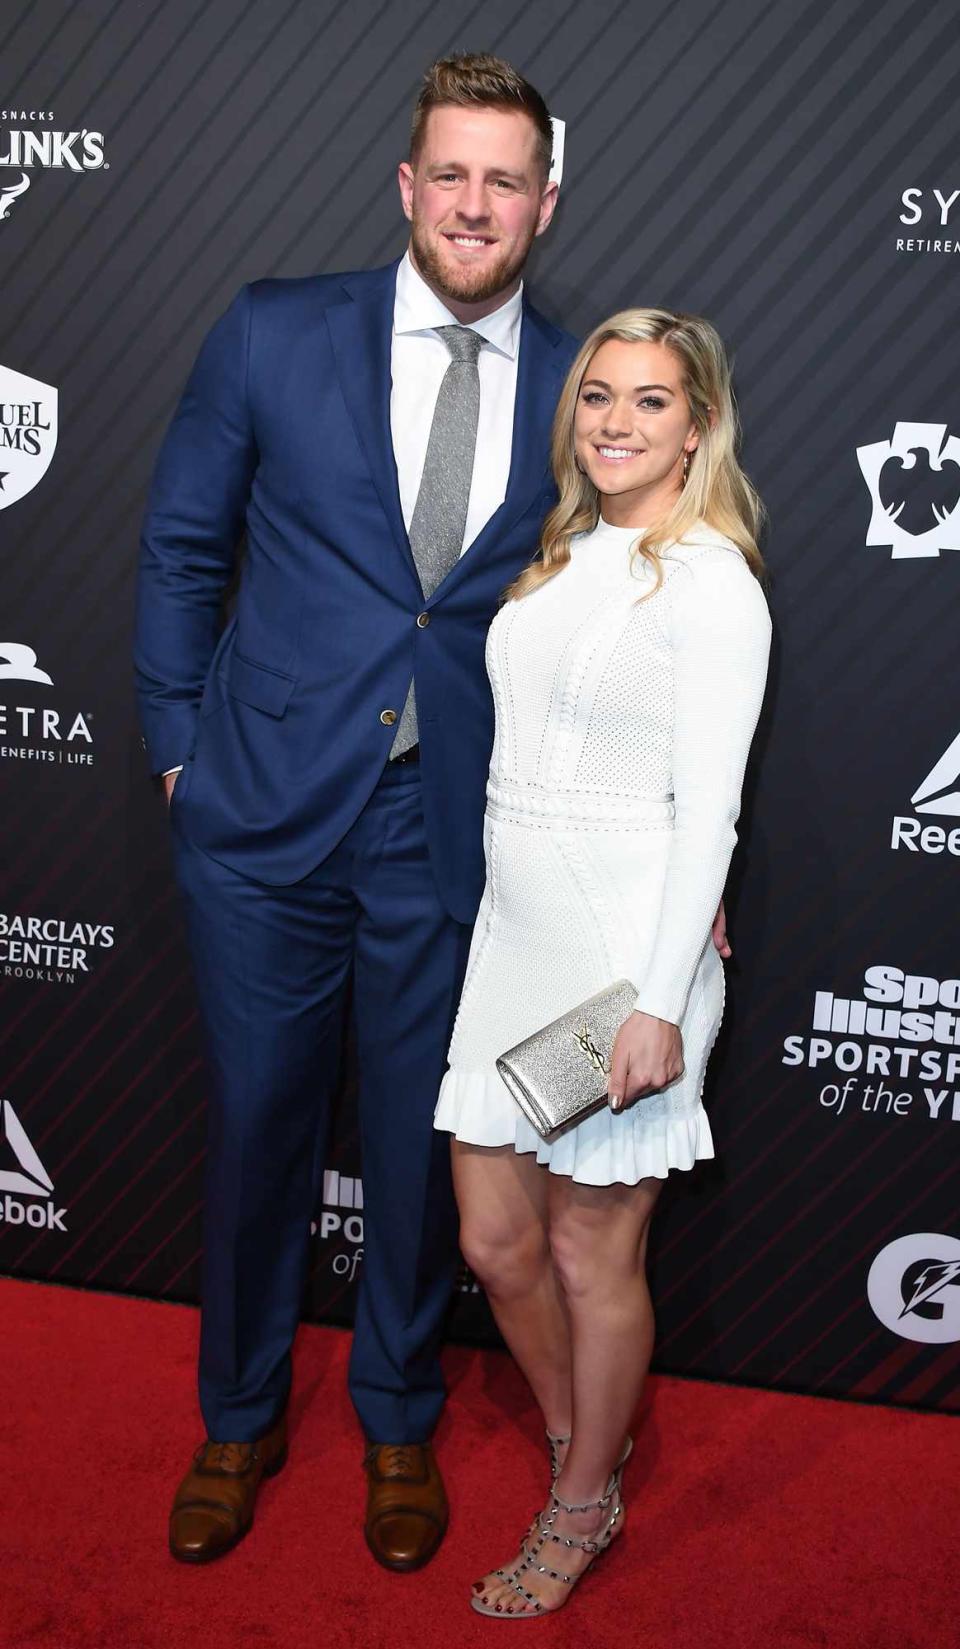 J. J. Watt and his girlfriend Kealia Ohai arrive for the 2017 Sports Illustrated Sportsperson of the Year Award Show on December 5, 2017, at Barclays Center in New York City.